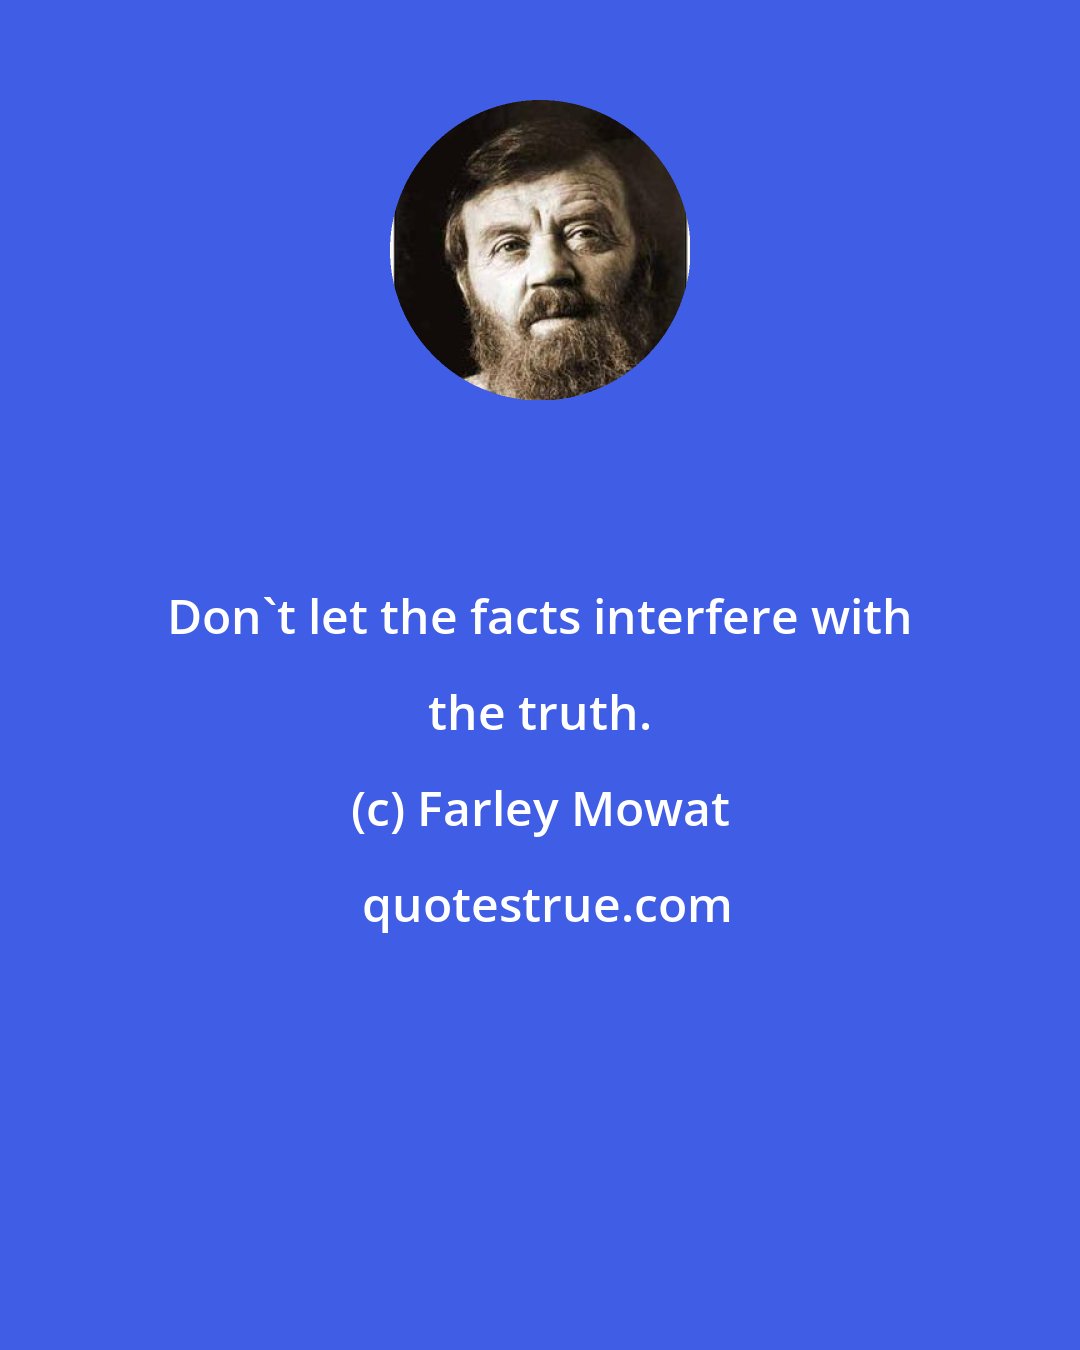 Farley Mowat: Don't let the facts interfere with the truth.